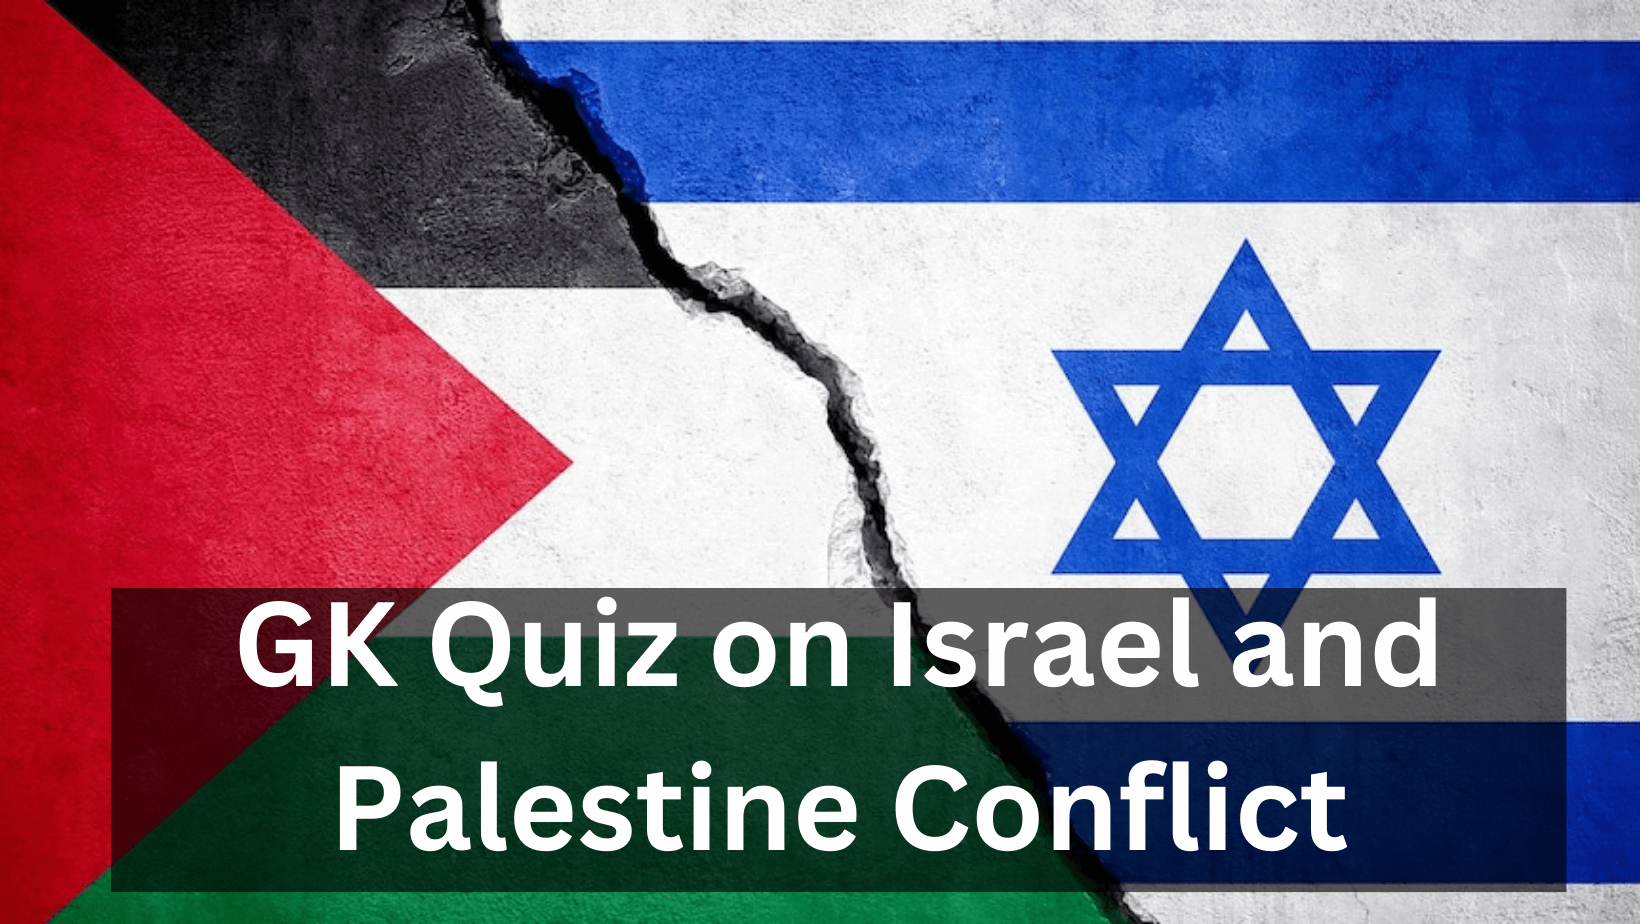 GK Quiz on Israel and Palestine Conflict